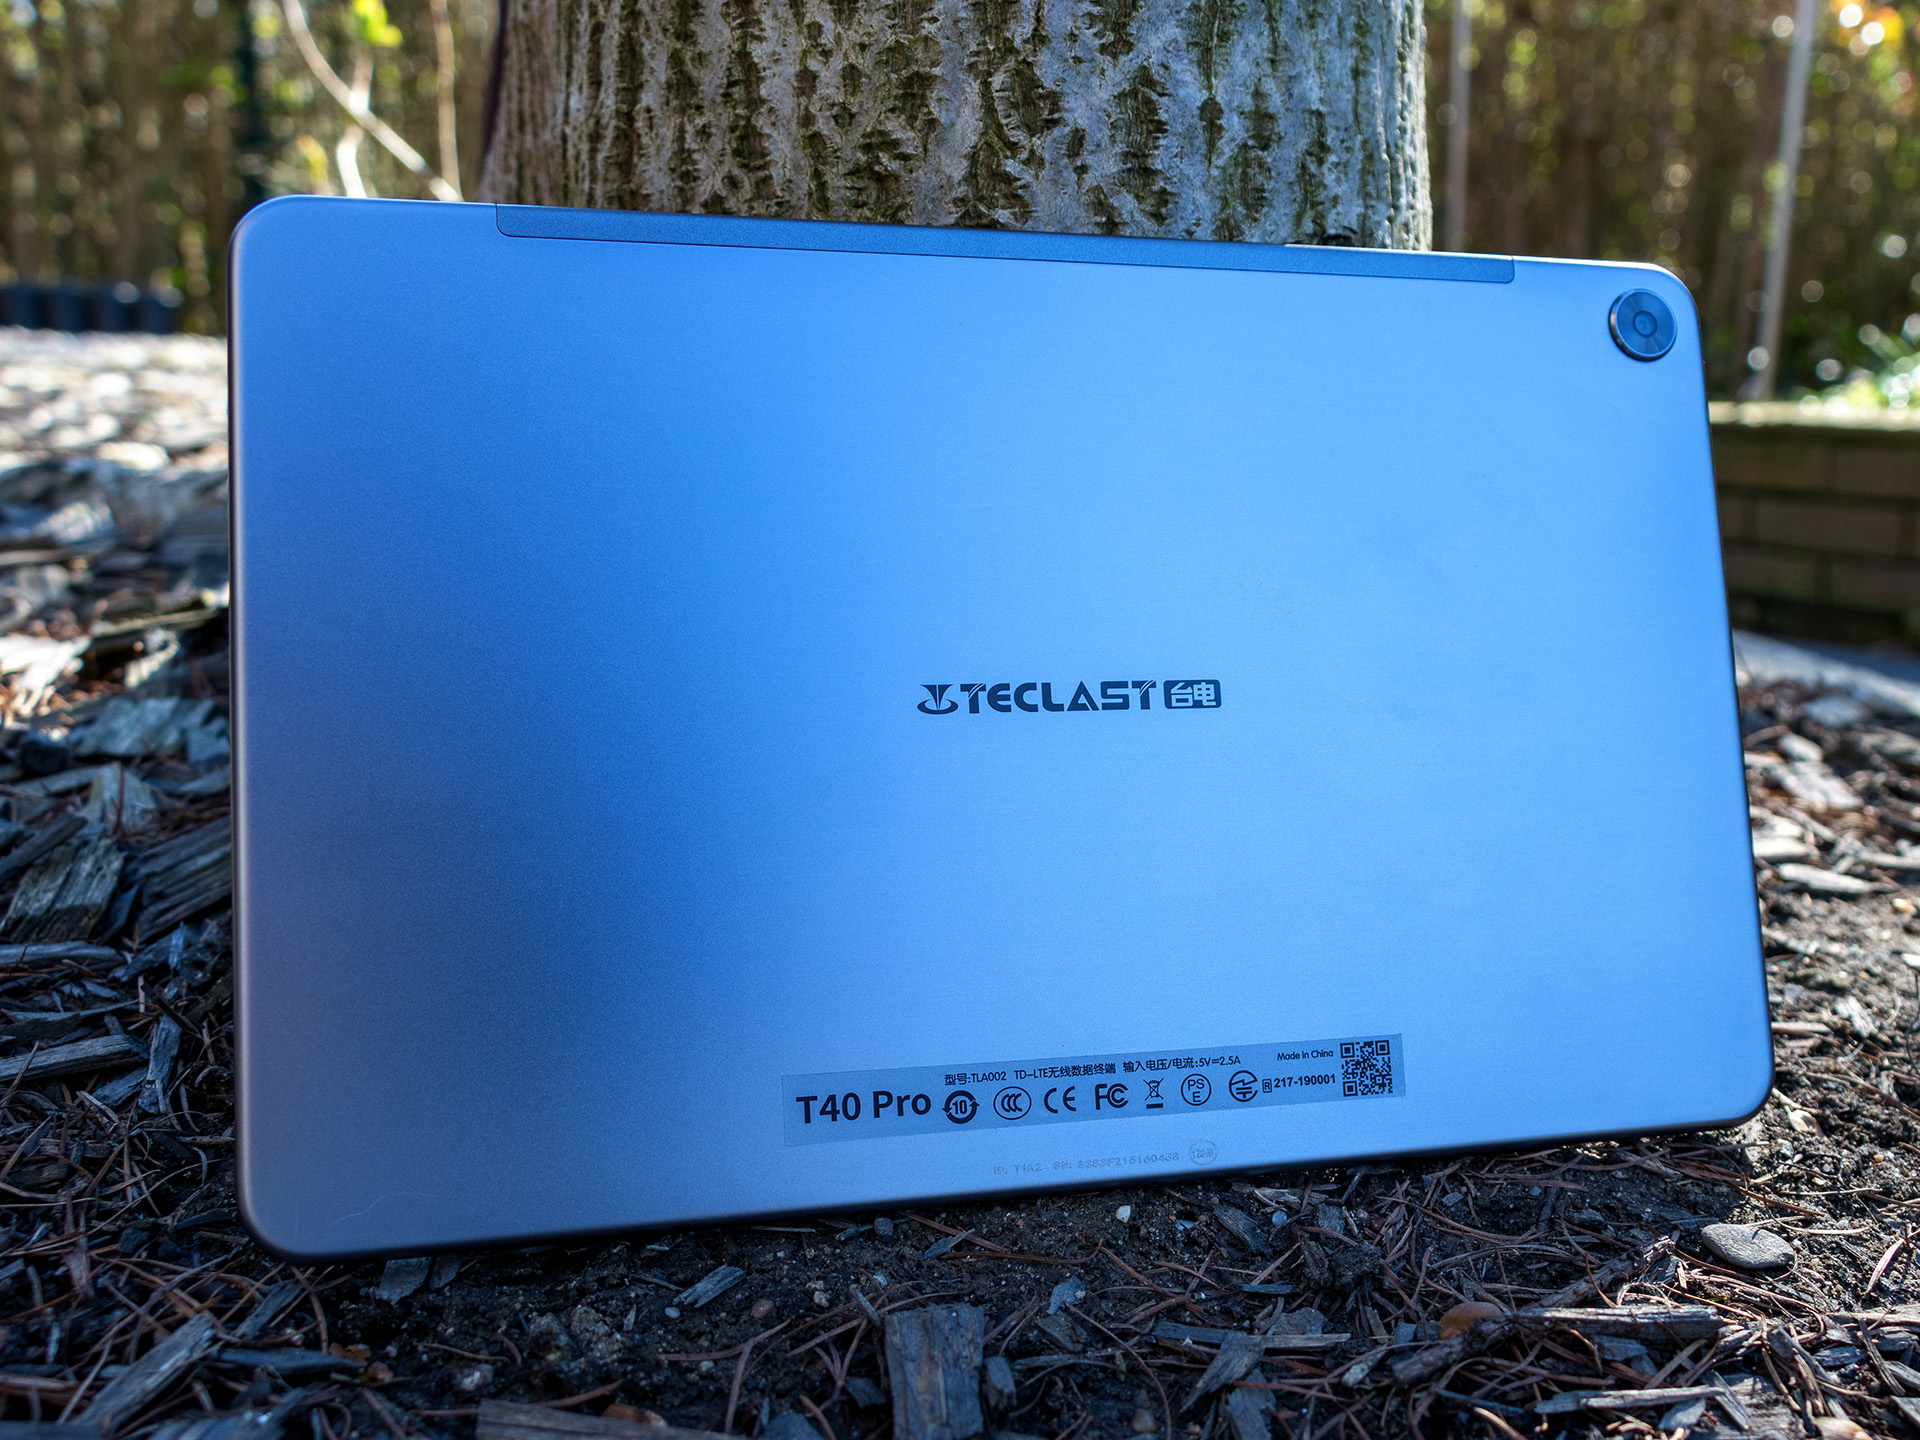 Teclast T40 Pro review - Affordable tablet with LTE